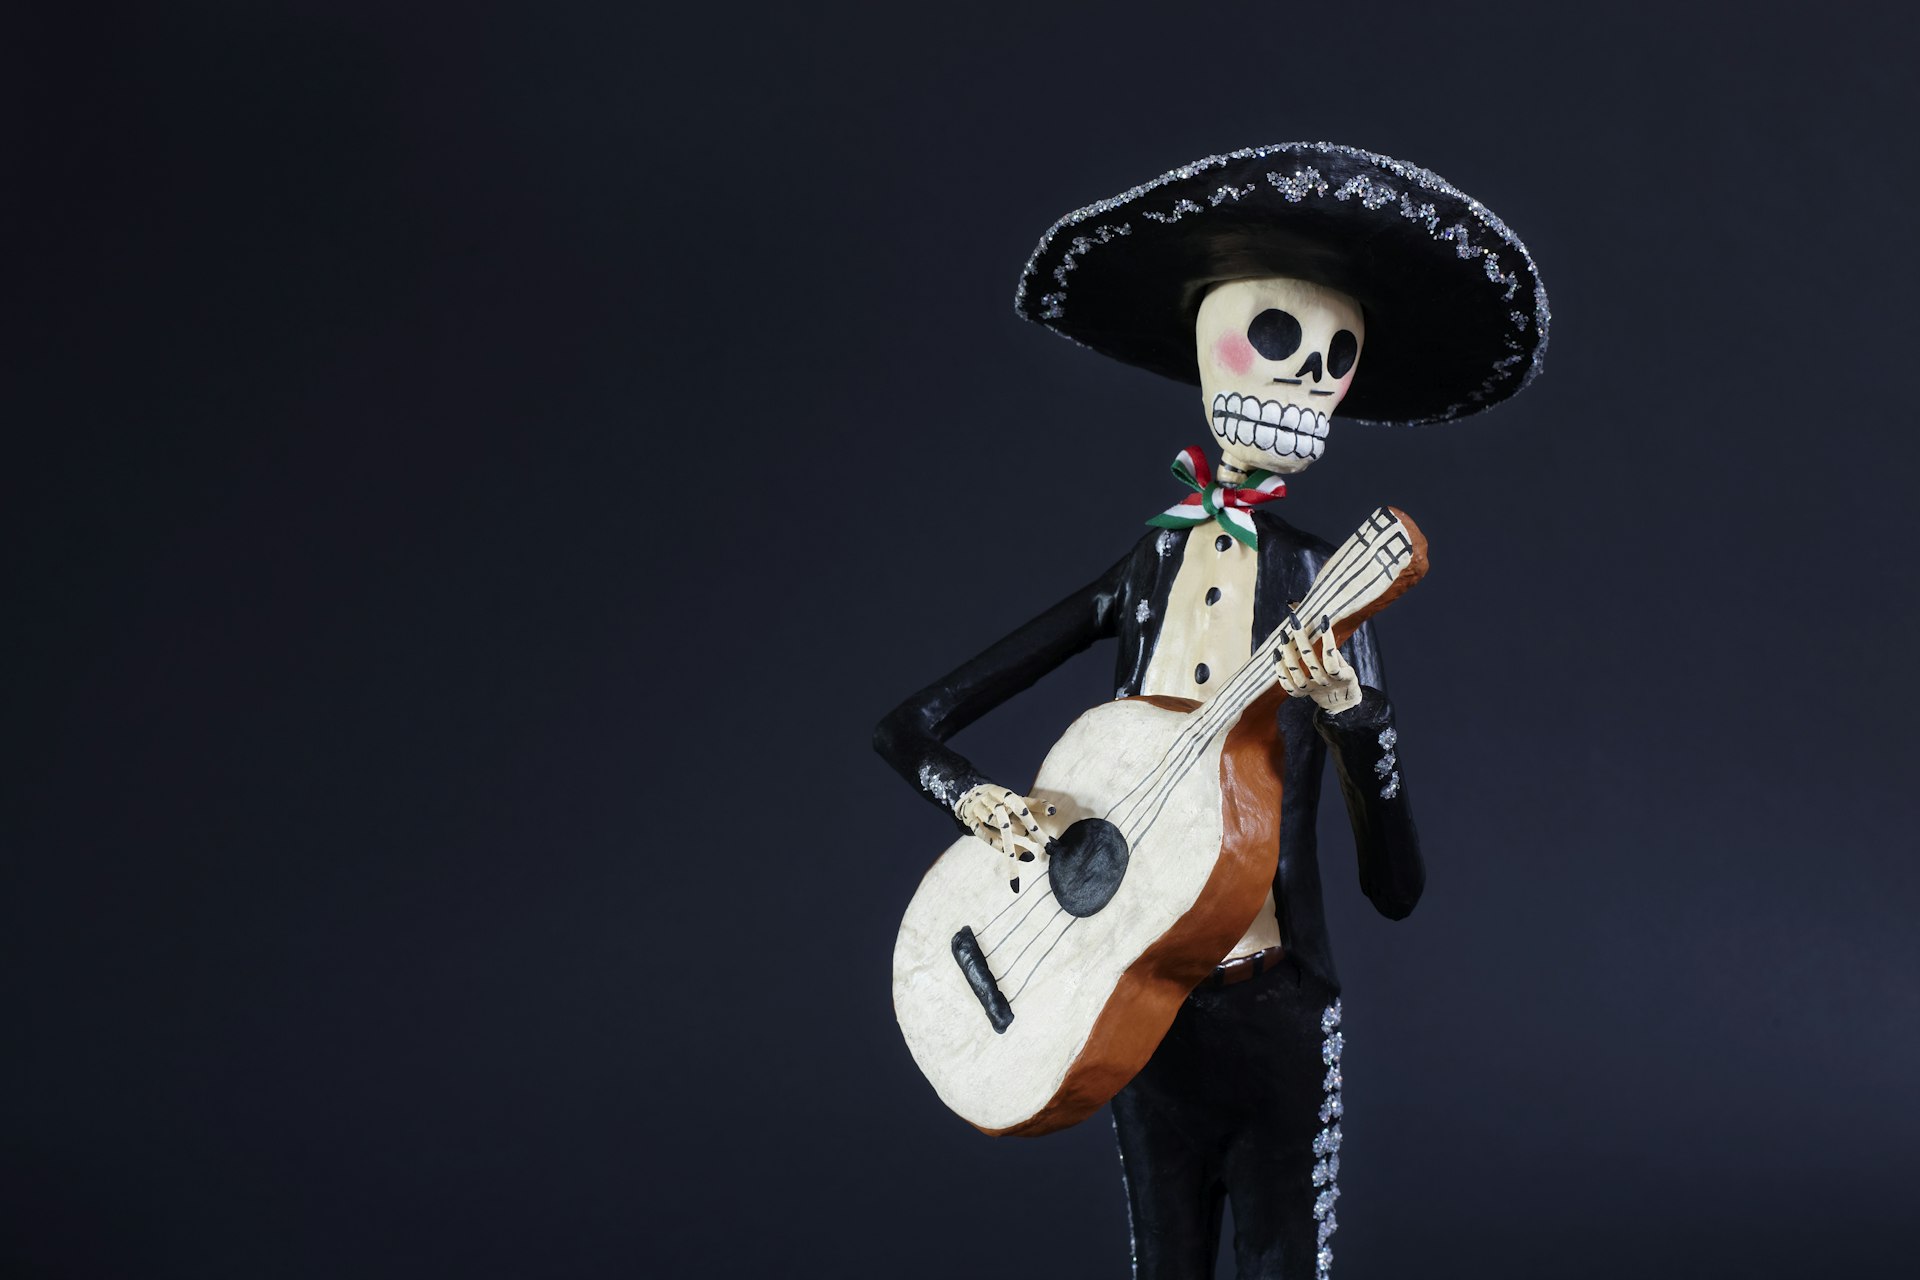 Day of the Dead doll Mariachi Guitarron player